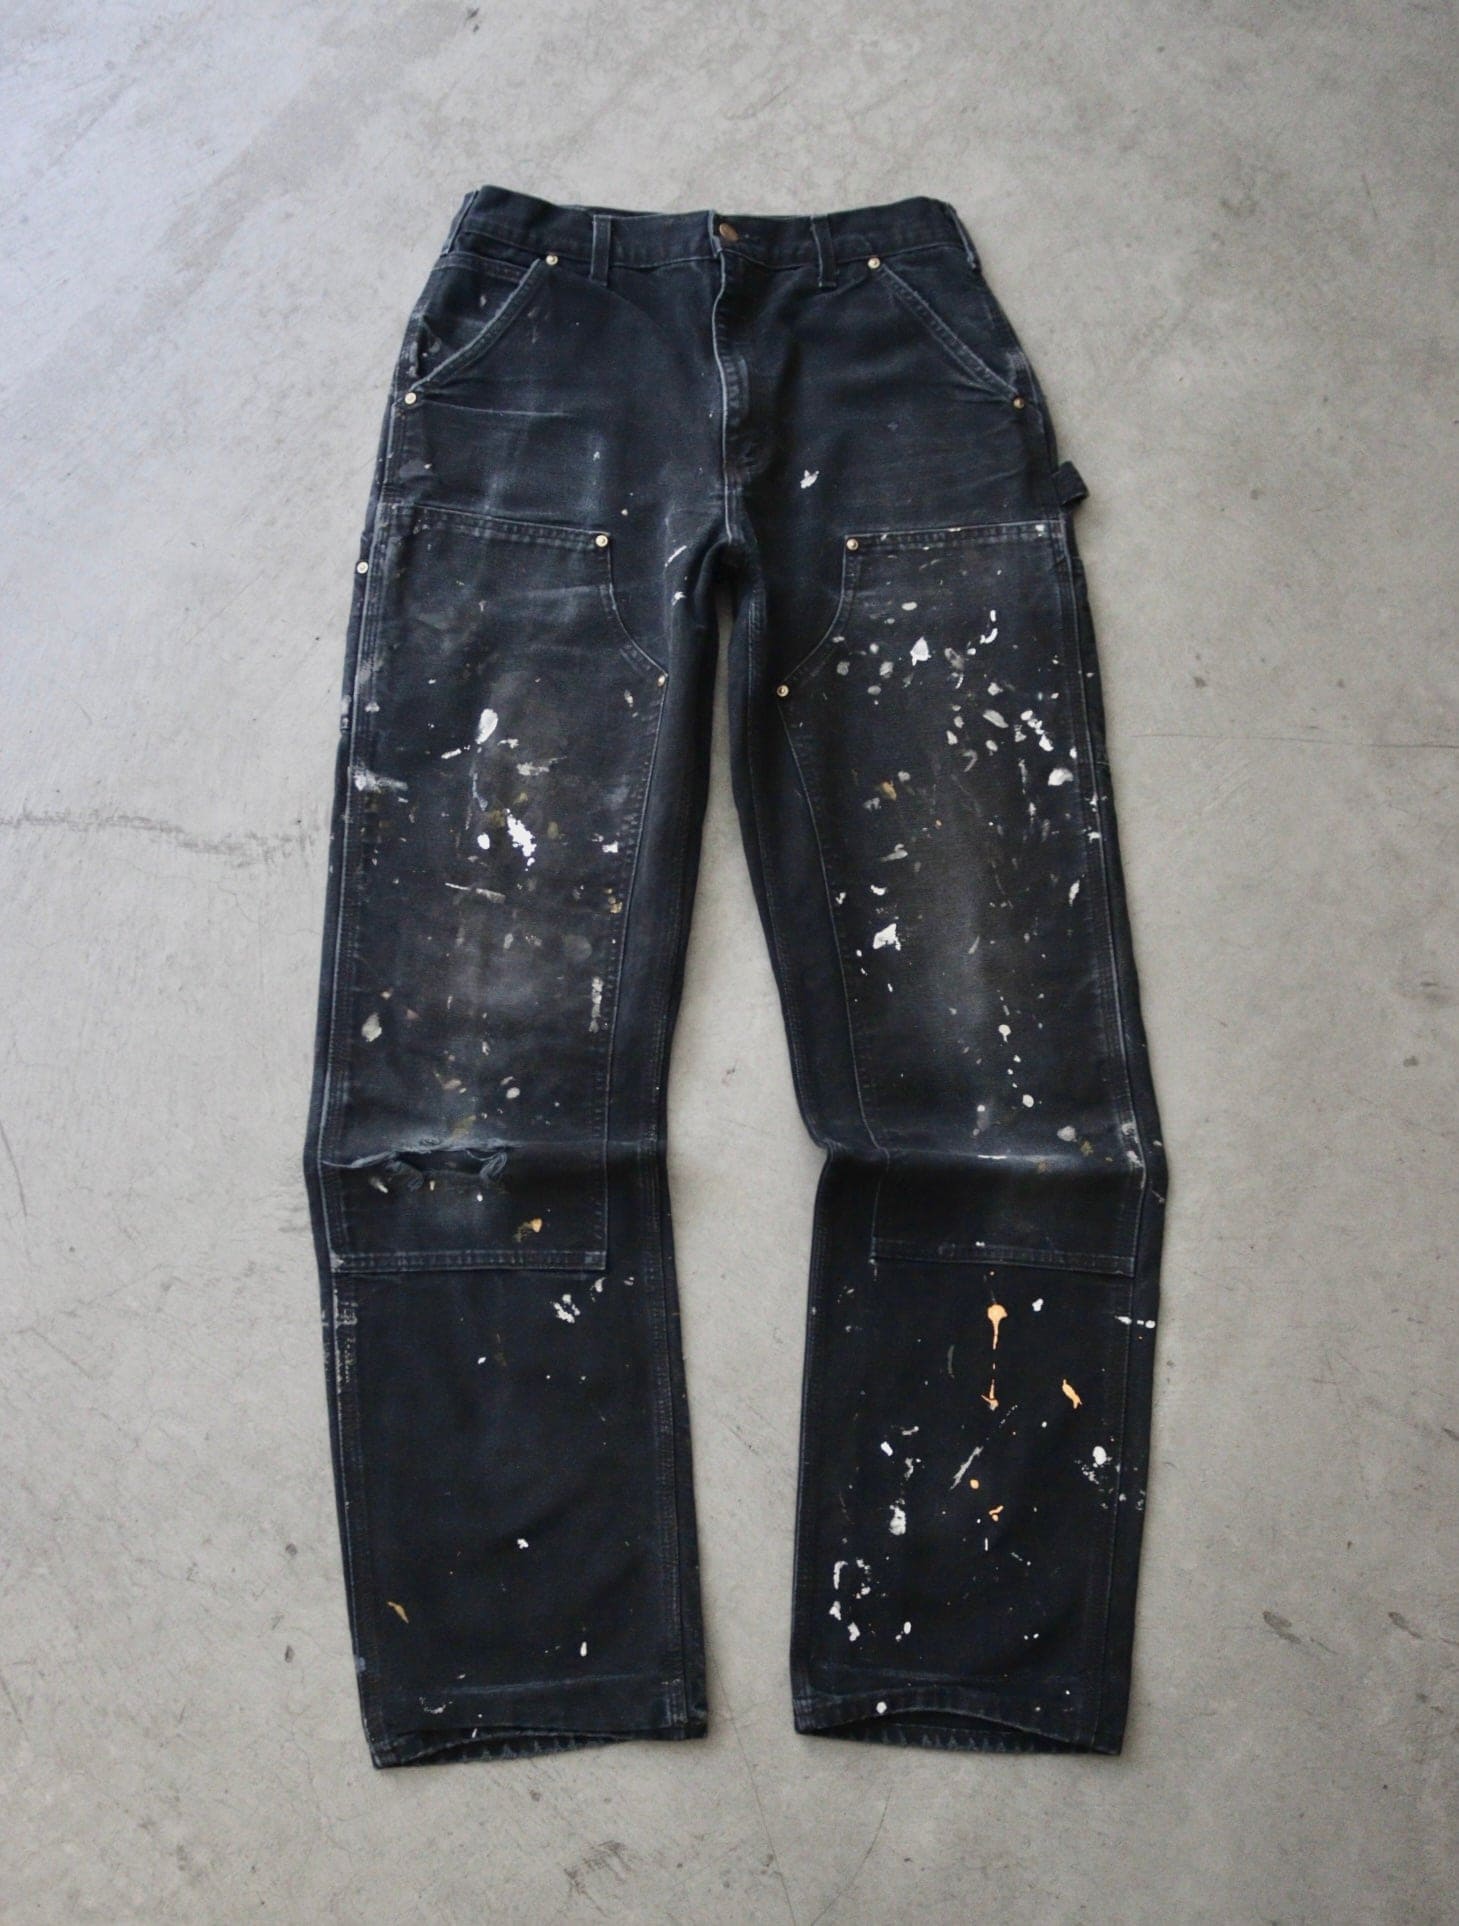 CARHARTT PAINTED FADED DOUBLE KNEE WORK PANTS